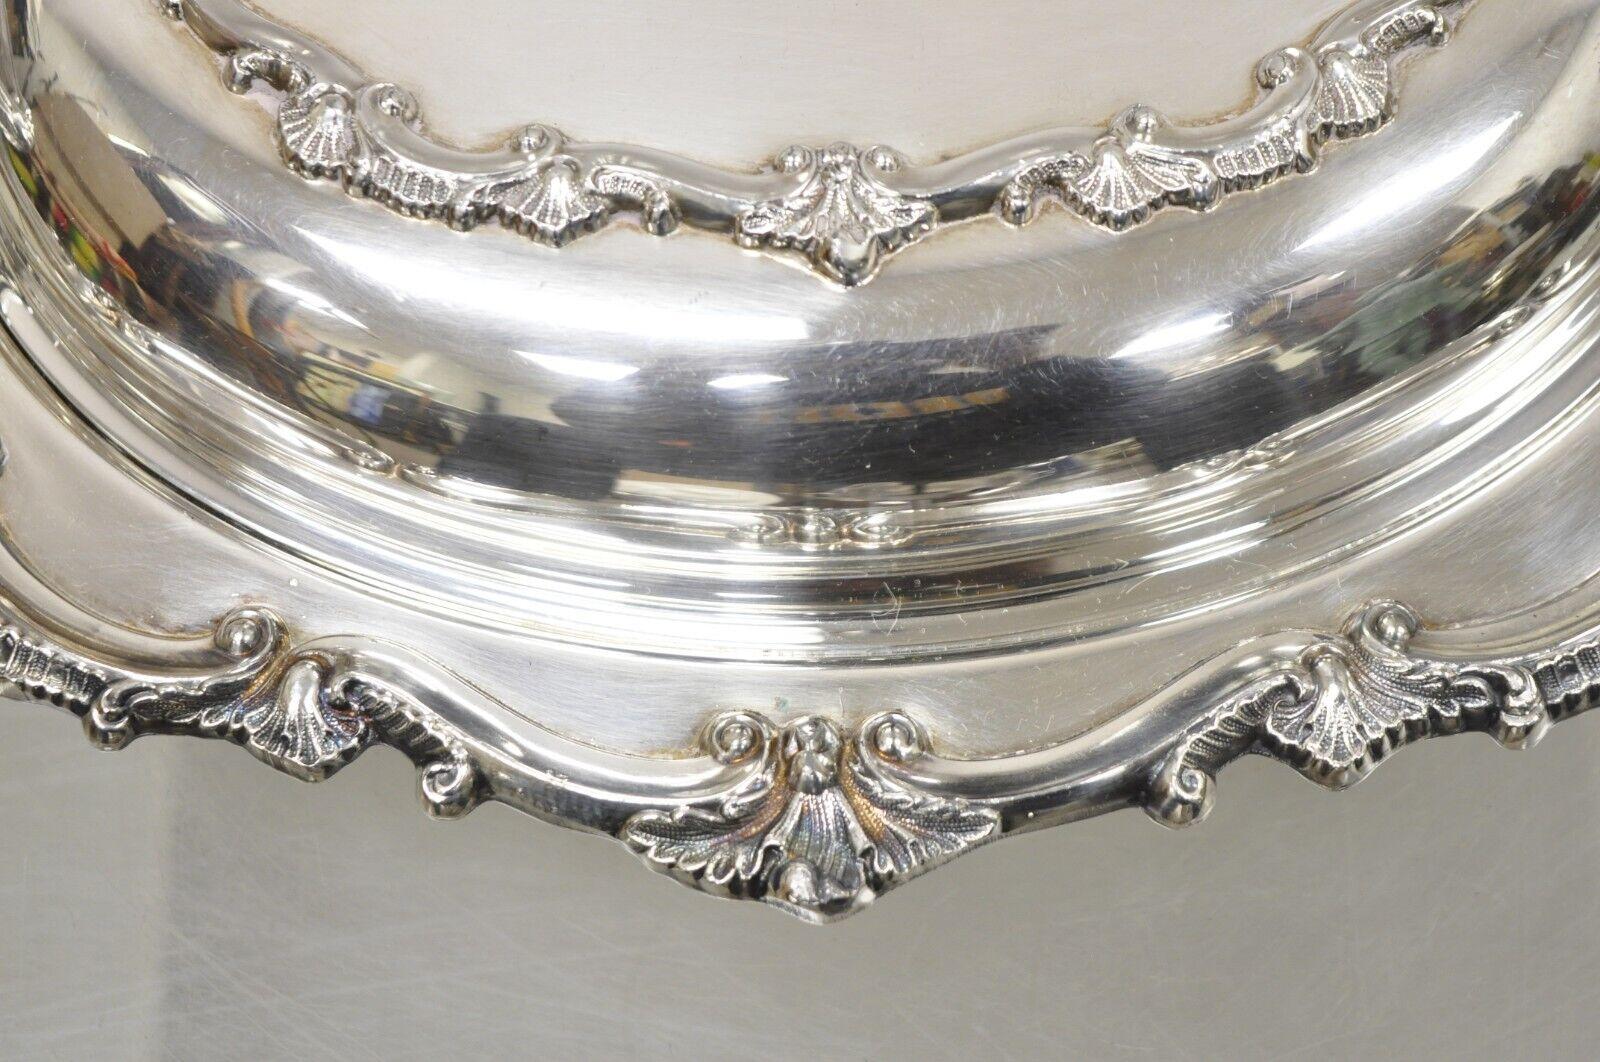 20th Century Victorian Style Silver Plated Lidded Ornate Serving Dish Bristol Silver by Poole For Sale